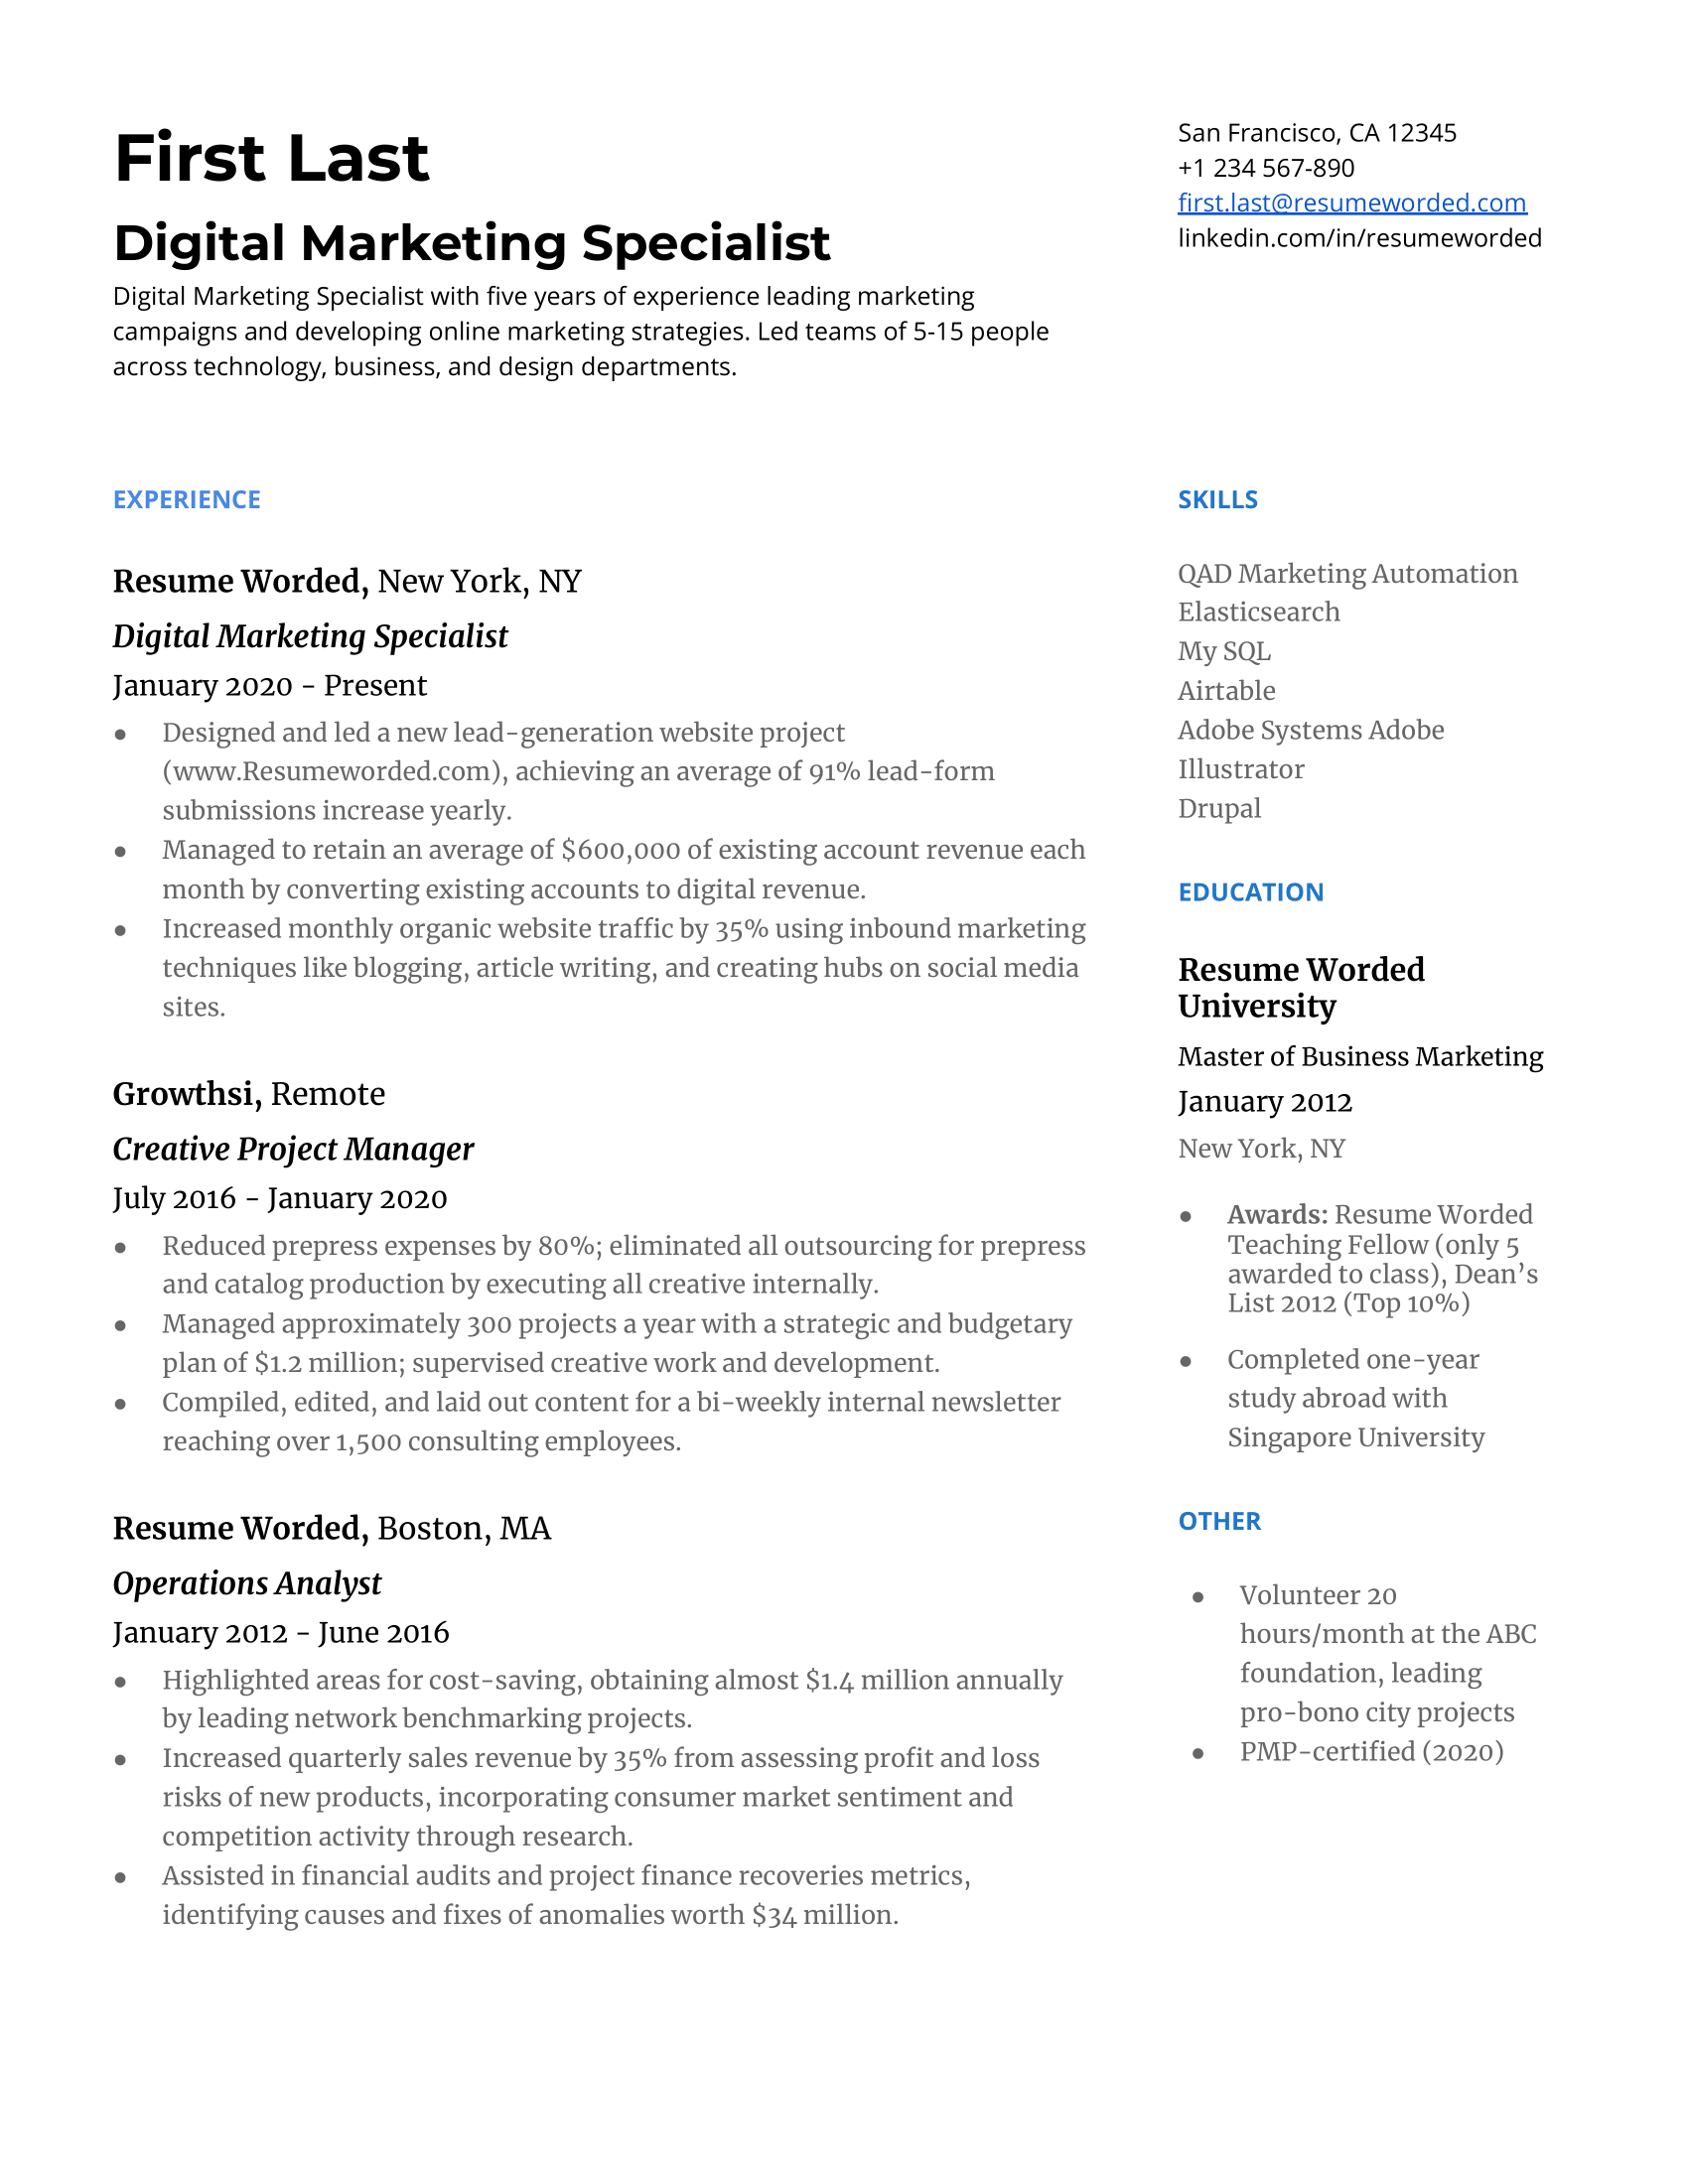 Digital marketing specialist resume with measurable accomplishments and hard skills